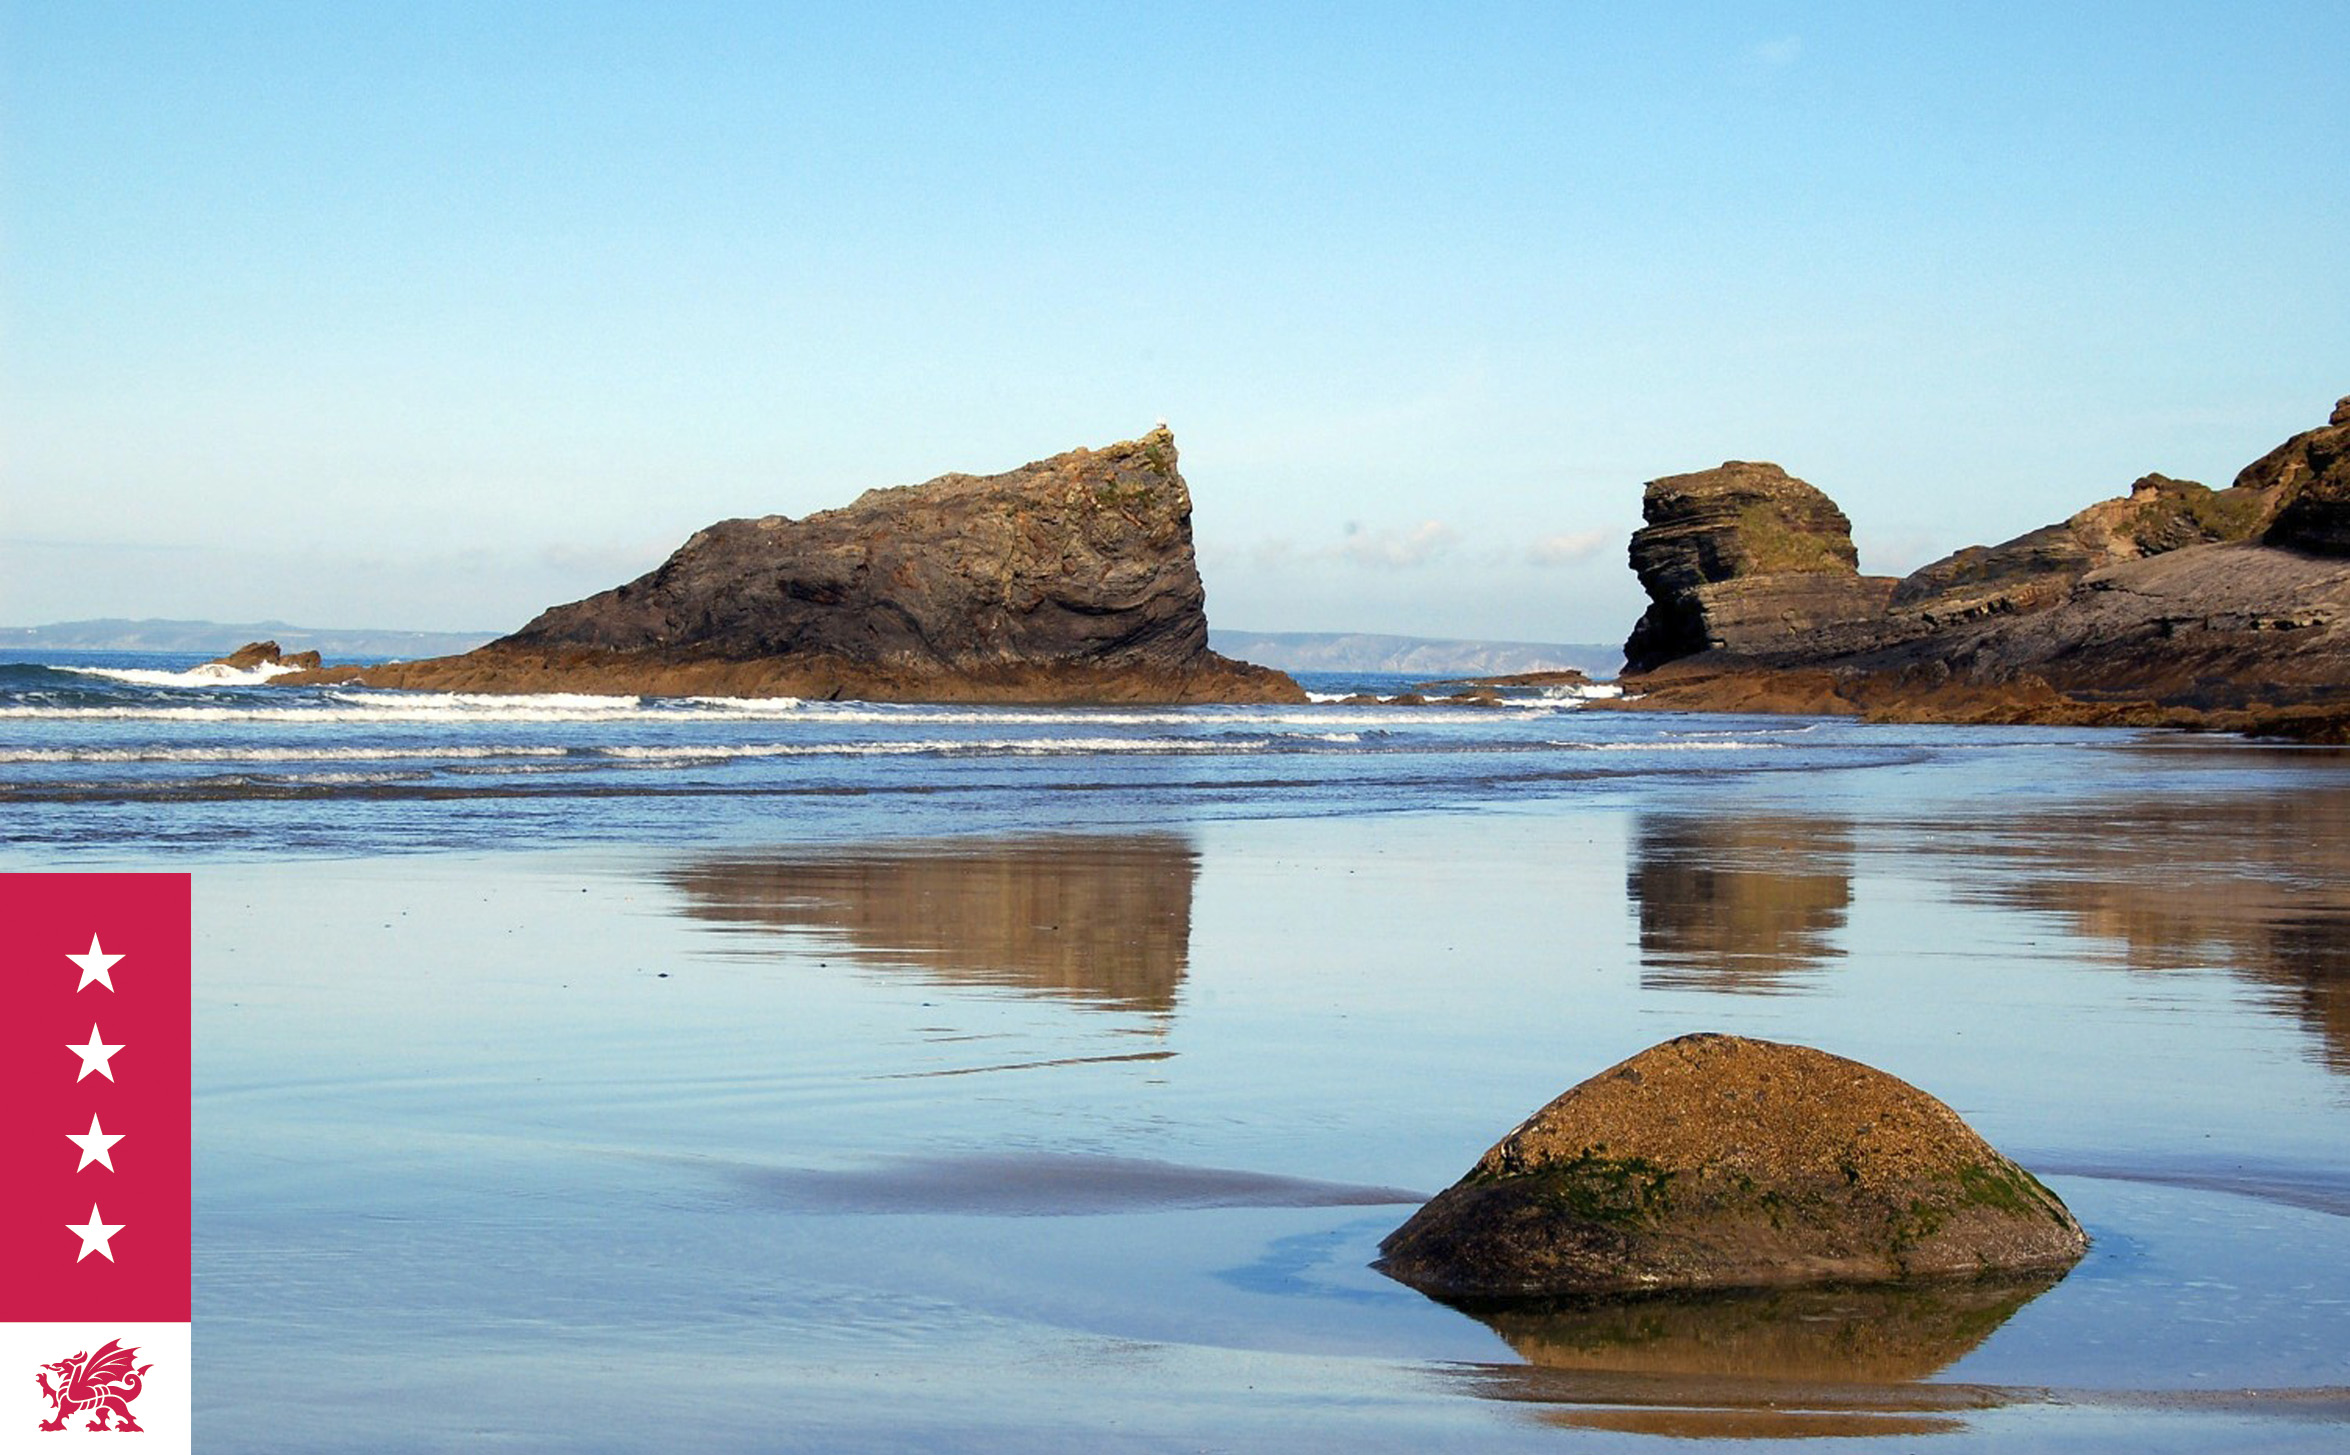 Coastal scene with rock formations reflected on a wet beach